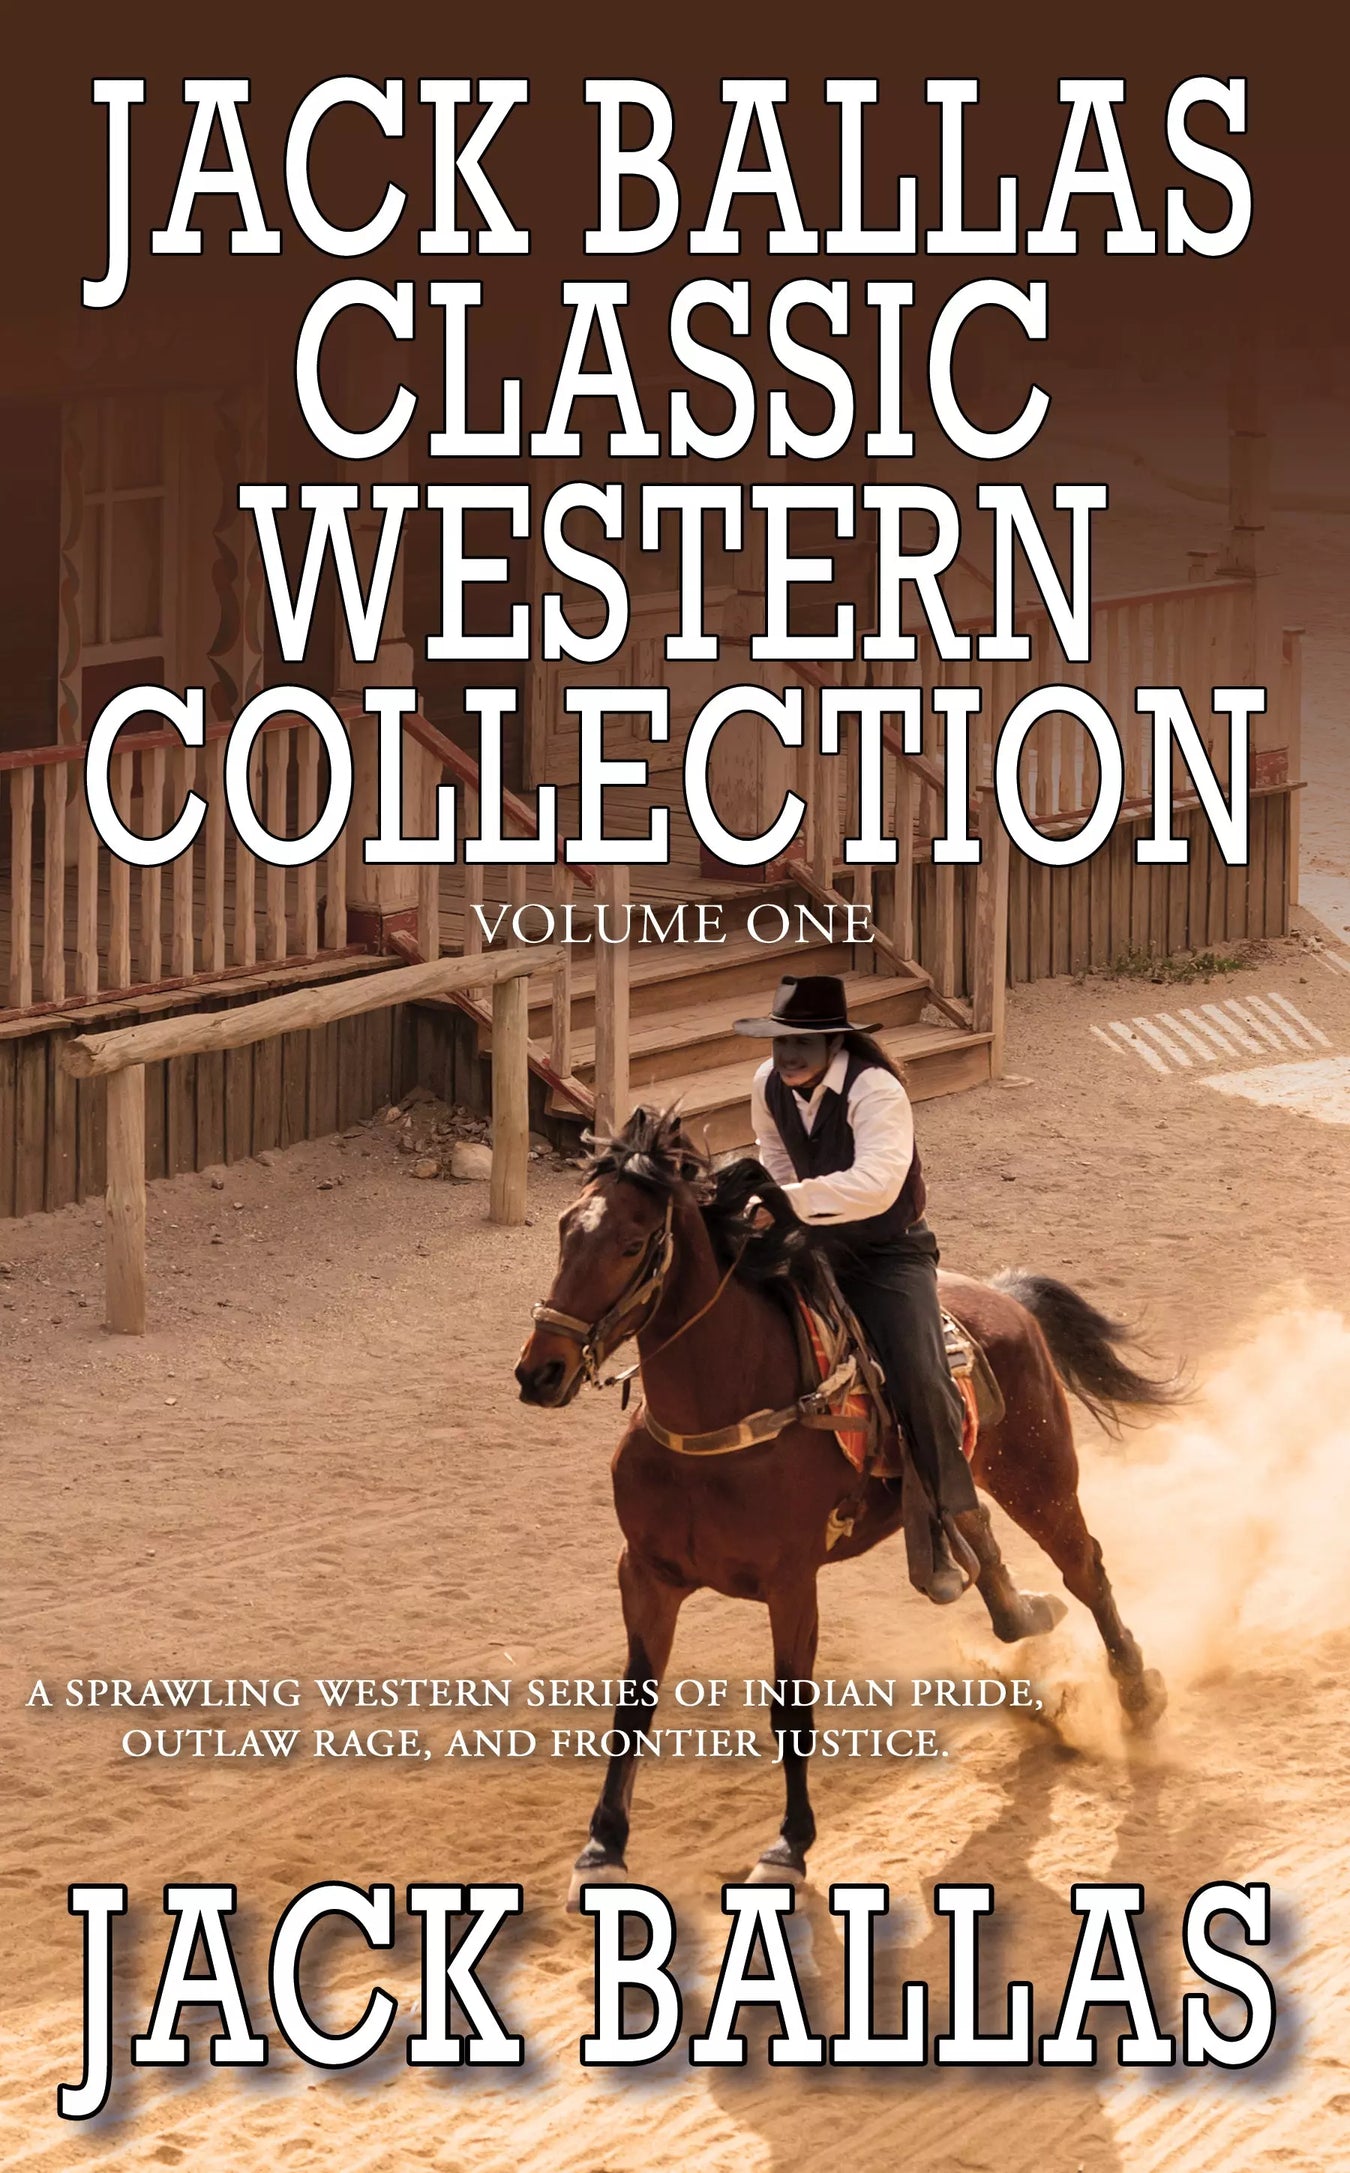 The Jack Ballas Western Collections